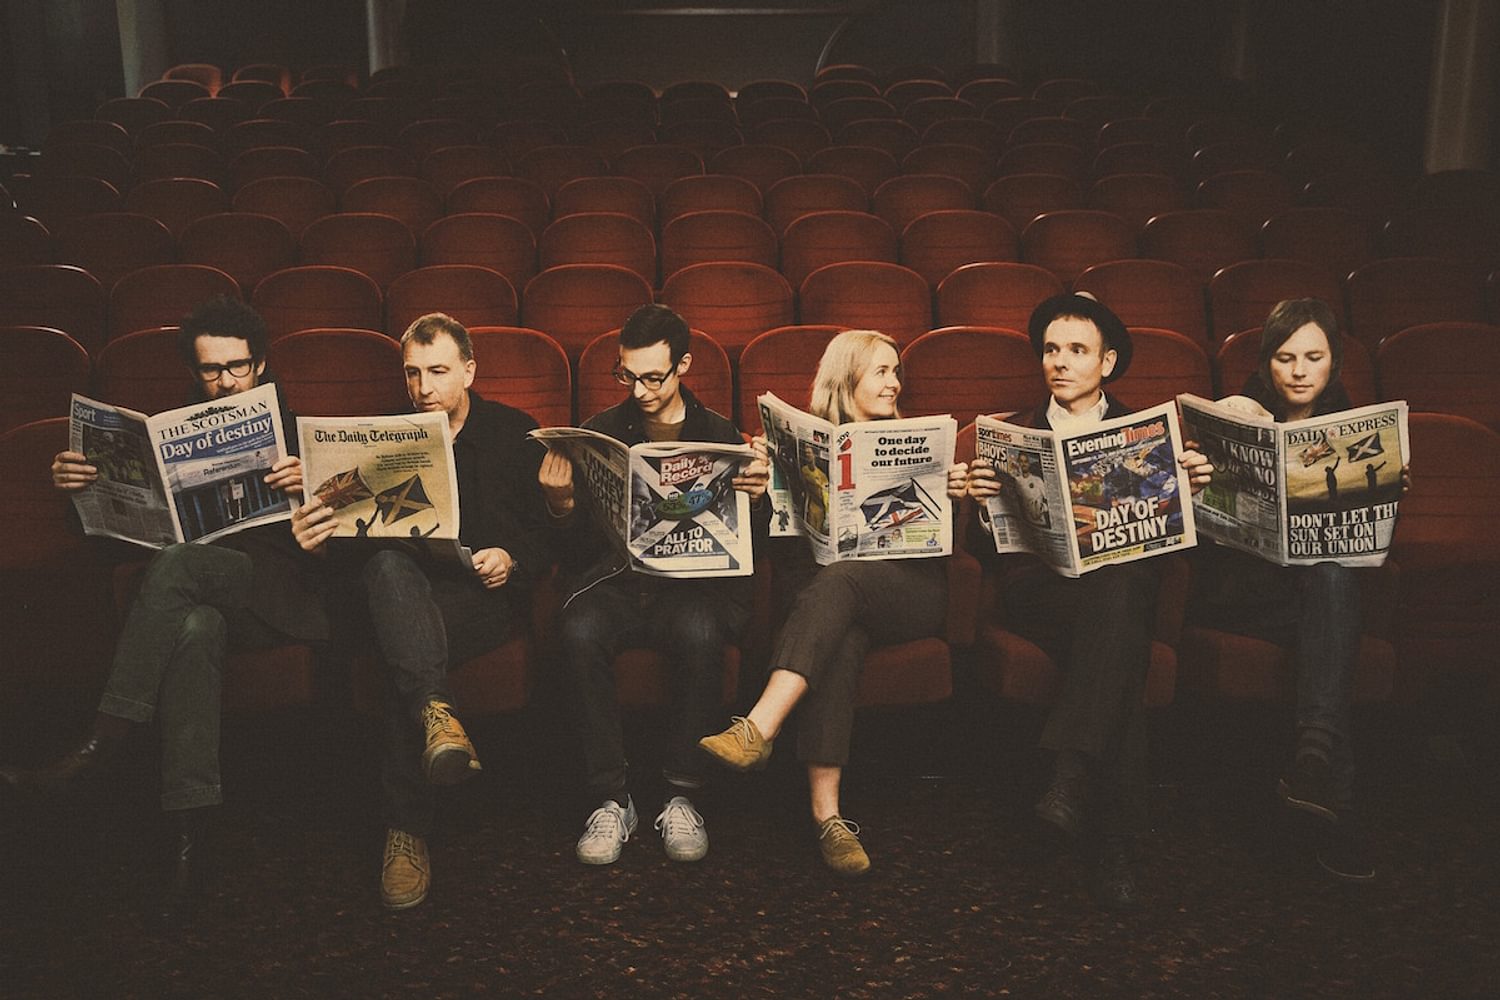 Belle & Sebastian, Grace Jones, Young Fathers to play Festival No. 6 2015